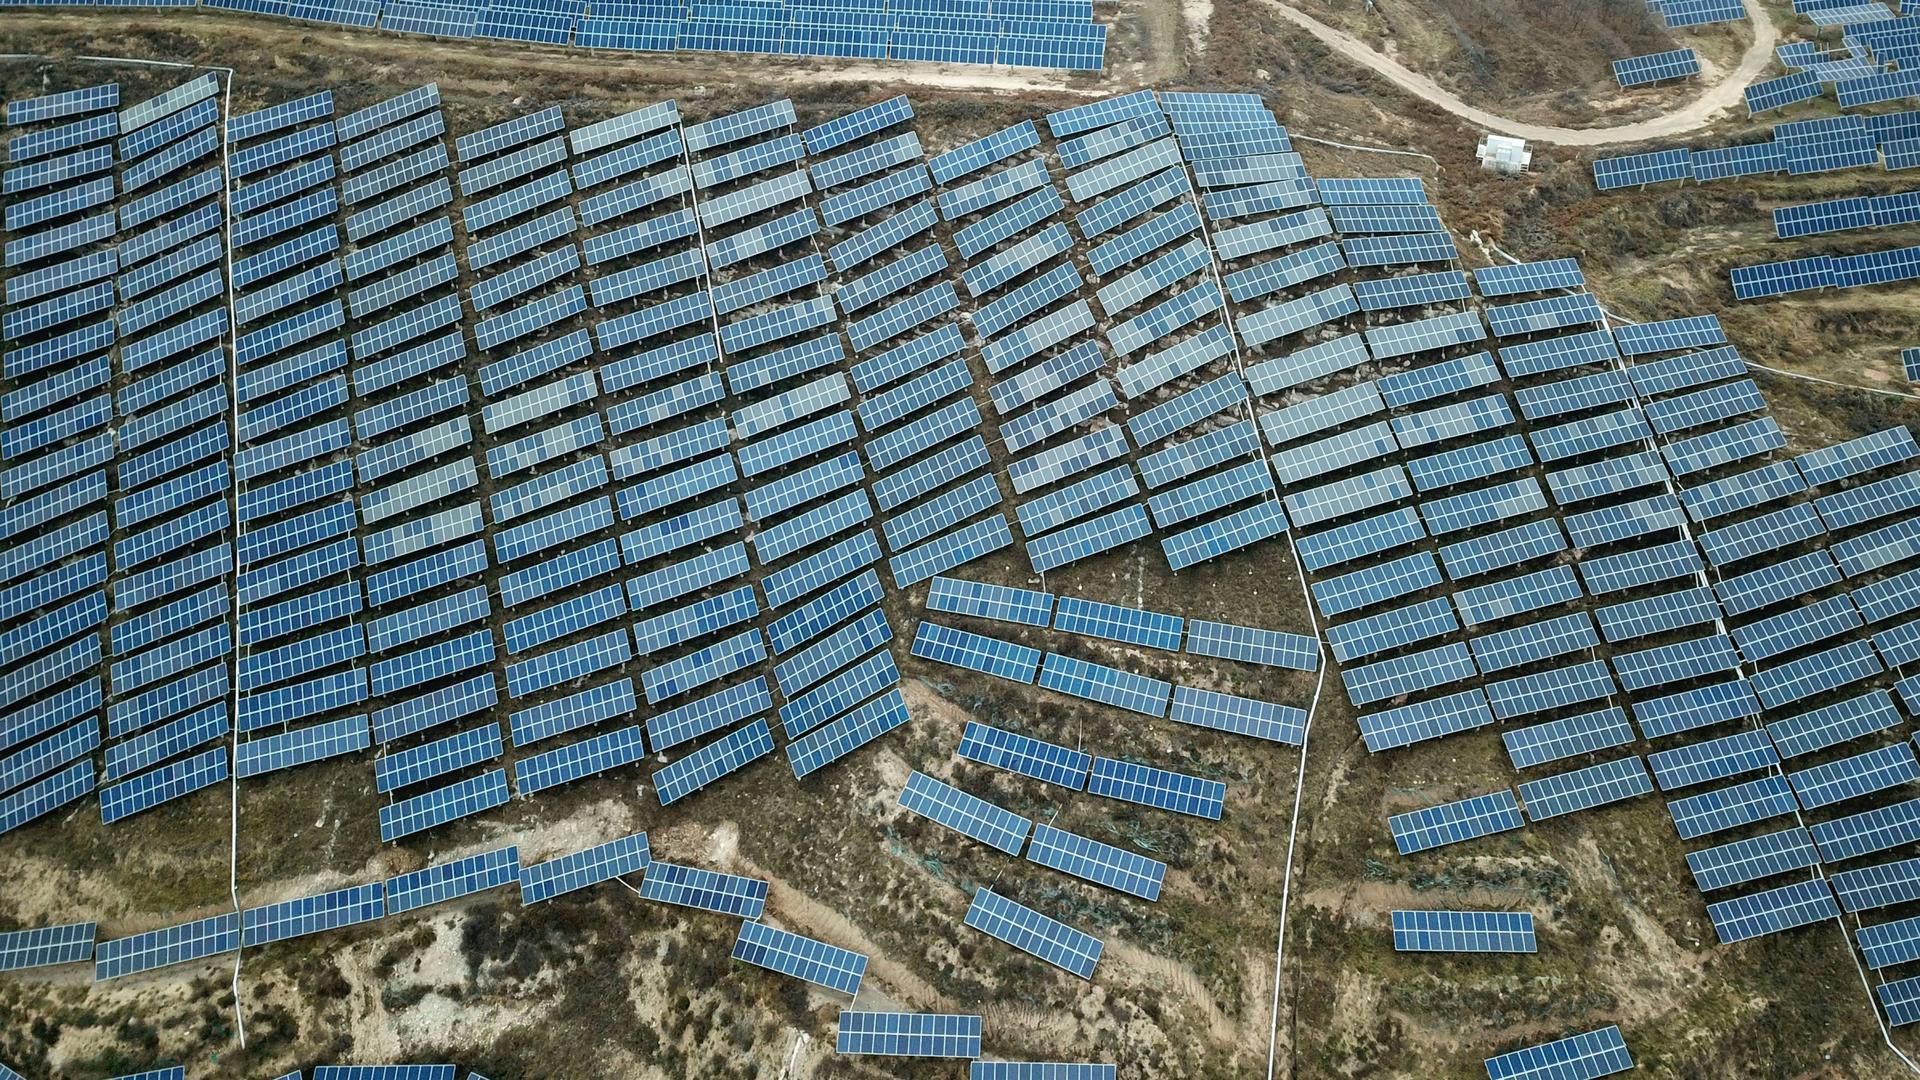 A solar panel installation is seen in Ruicheng County in central China's Shanxi Province, Nov. 27, 2019. China's Premier Li Keqiang announced that the country would target a reduction of 18% in carbon intensity over the course of the next five years as pa